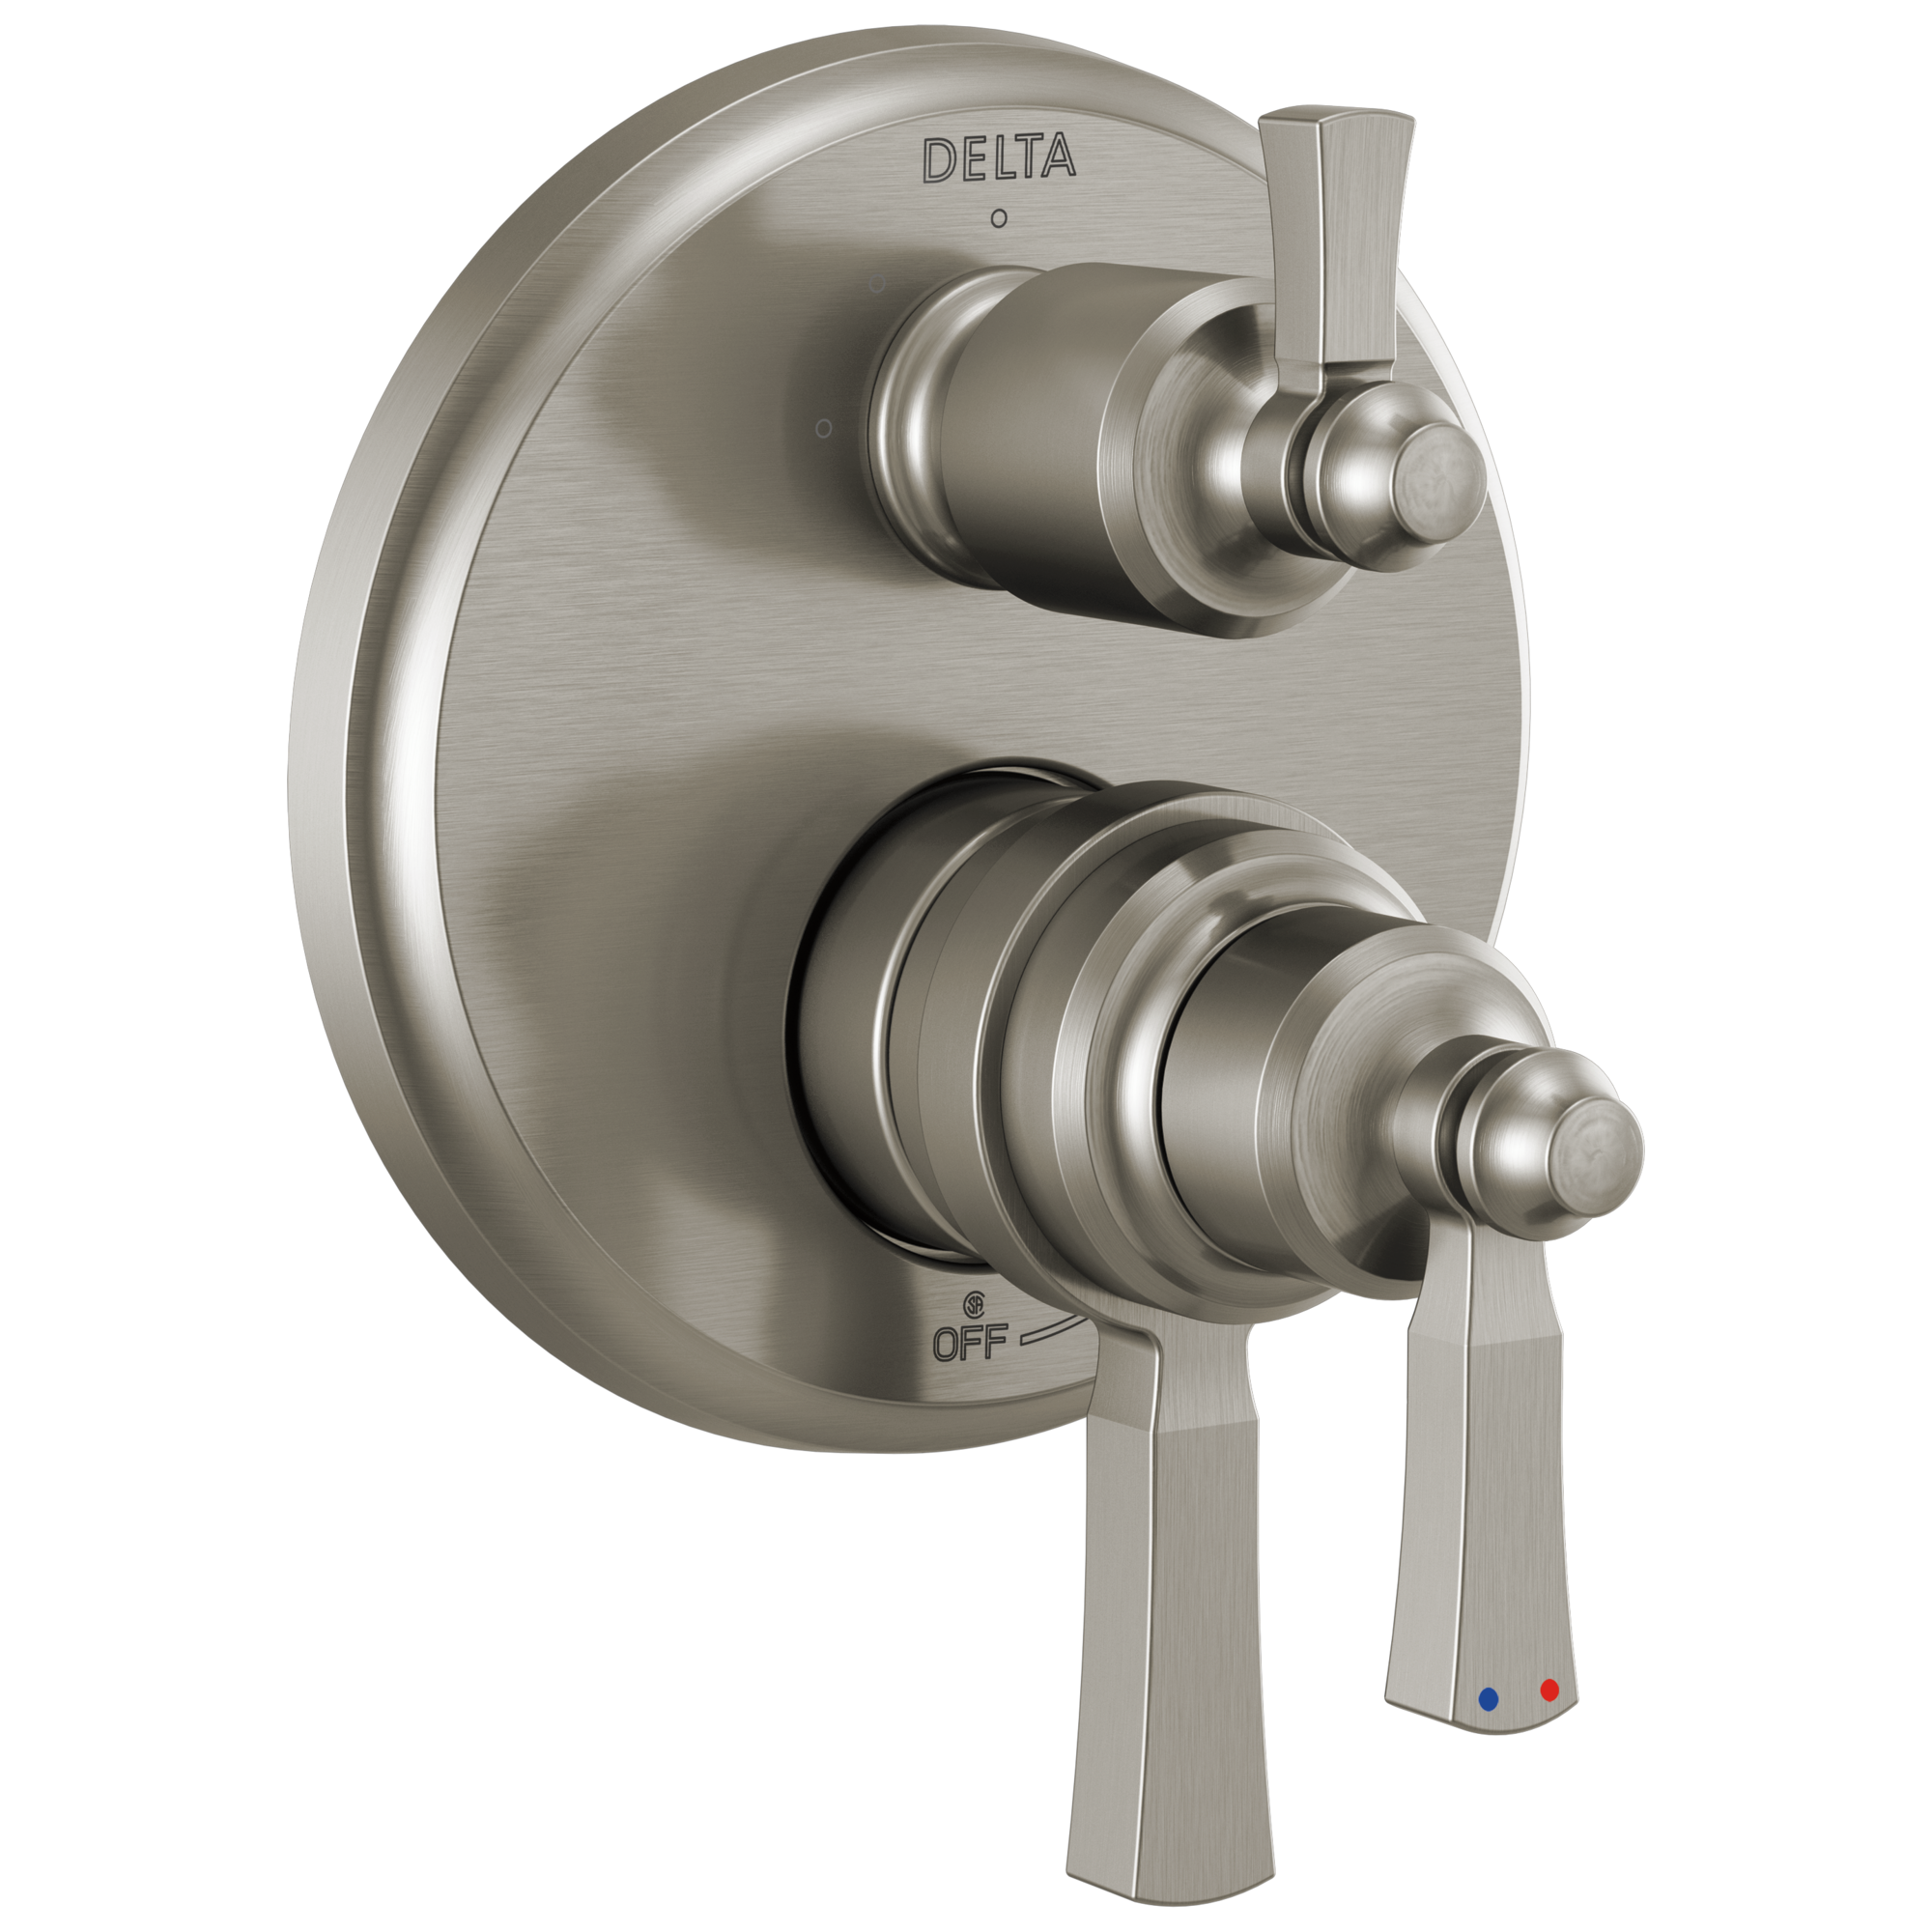 Delta Dorval™: Traditional 2-Handle Monitor 17 Series Valve Trim with 3 Setting Diverter